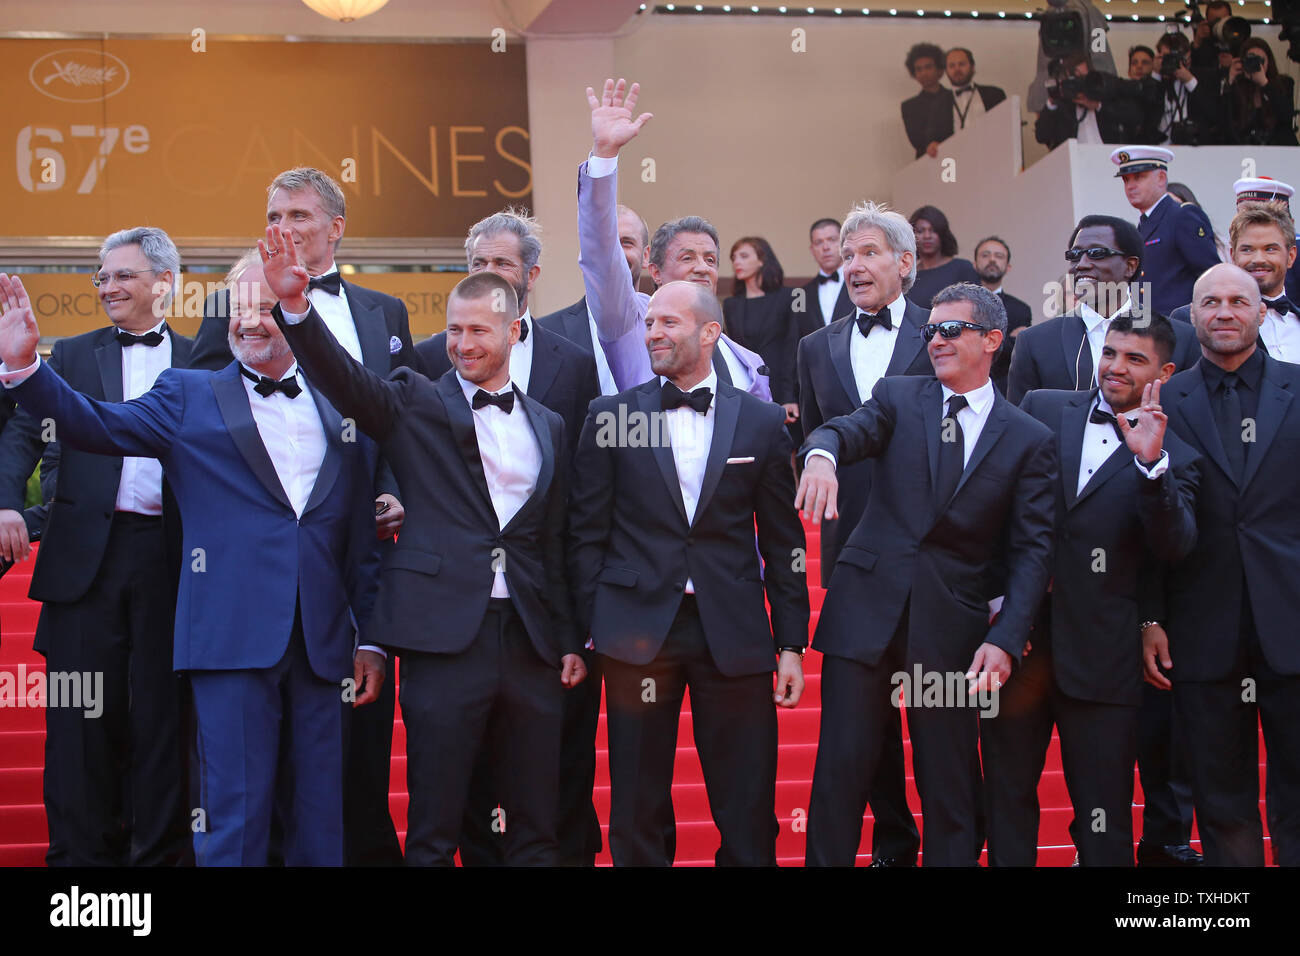 The team from the film 'The Expendables 3' including Glen Powell, Kelsey Grammer, Dolph Lundgren, Harrison Ford, Patrick Hughes, Antonio Banderas, Randy Couture, Victor Ortiz, Mel Gibson, Jason Statham, Sylvester Stallone, Ronda Rousey, Wesley Snipes, Kellan Lutz, and Avi Lerner arrive on the steps of the Palais des Festivals before the screening of the film during the 67th annual Cannes International Film Festival in Cannes, France on May 18, 2014.  UPI/David Silpa Stock Photo